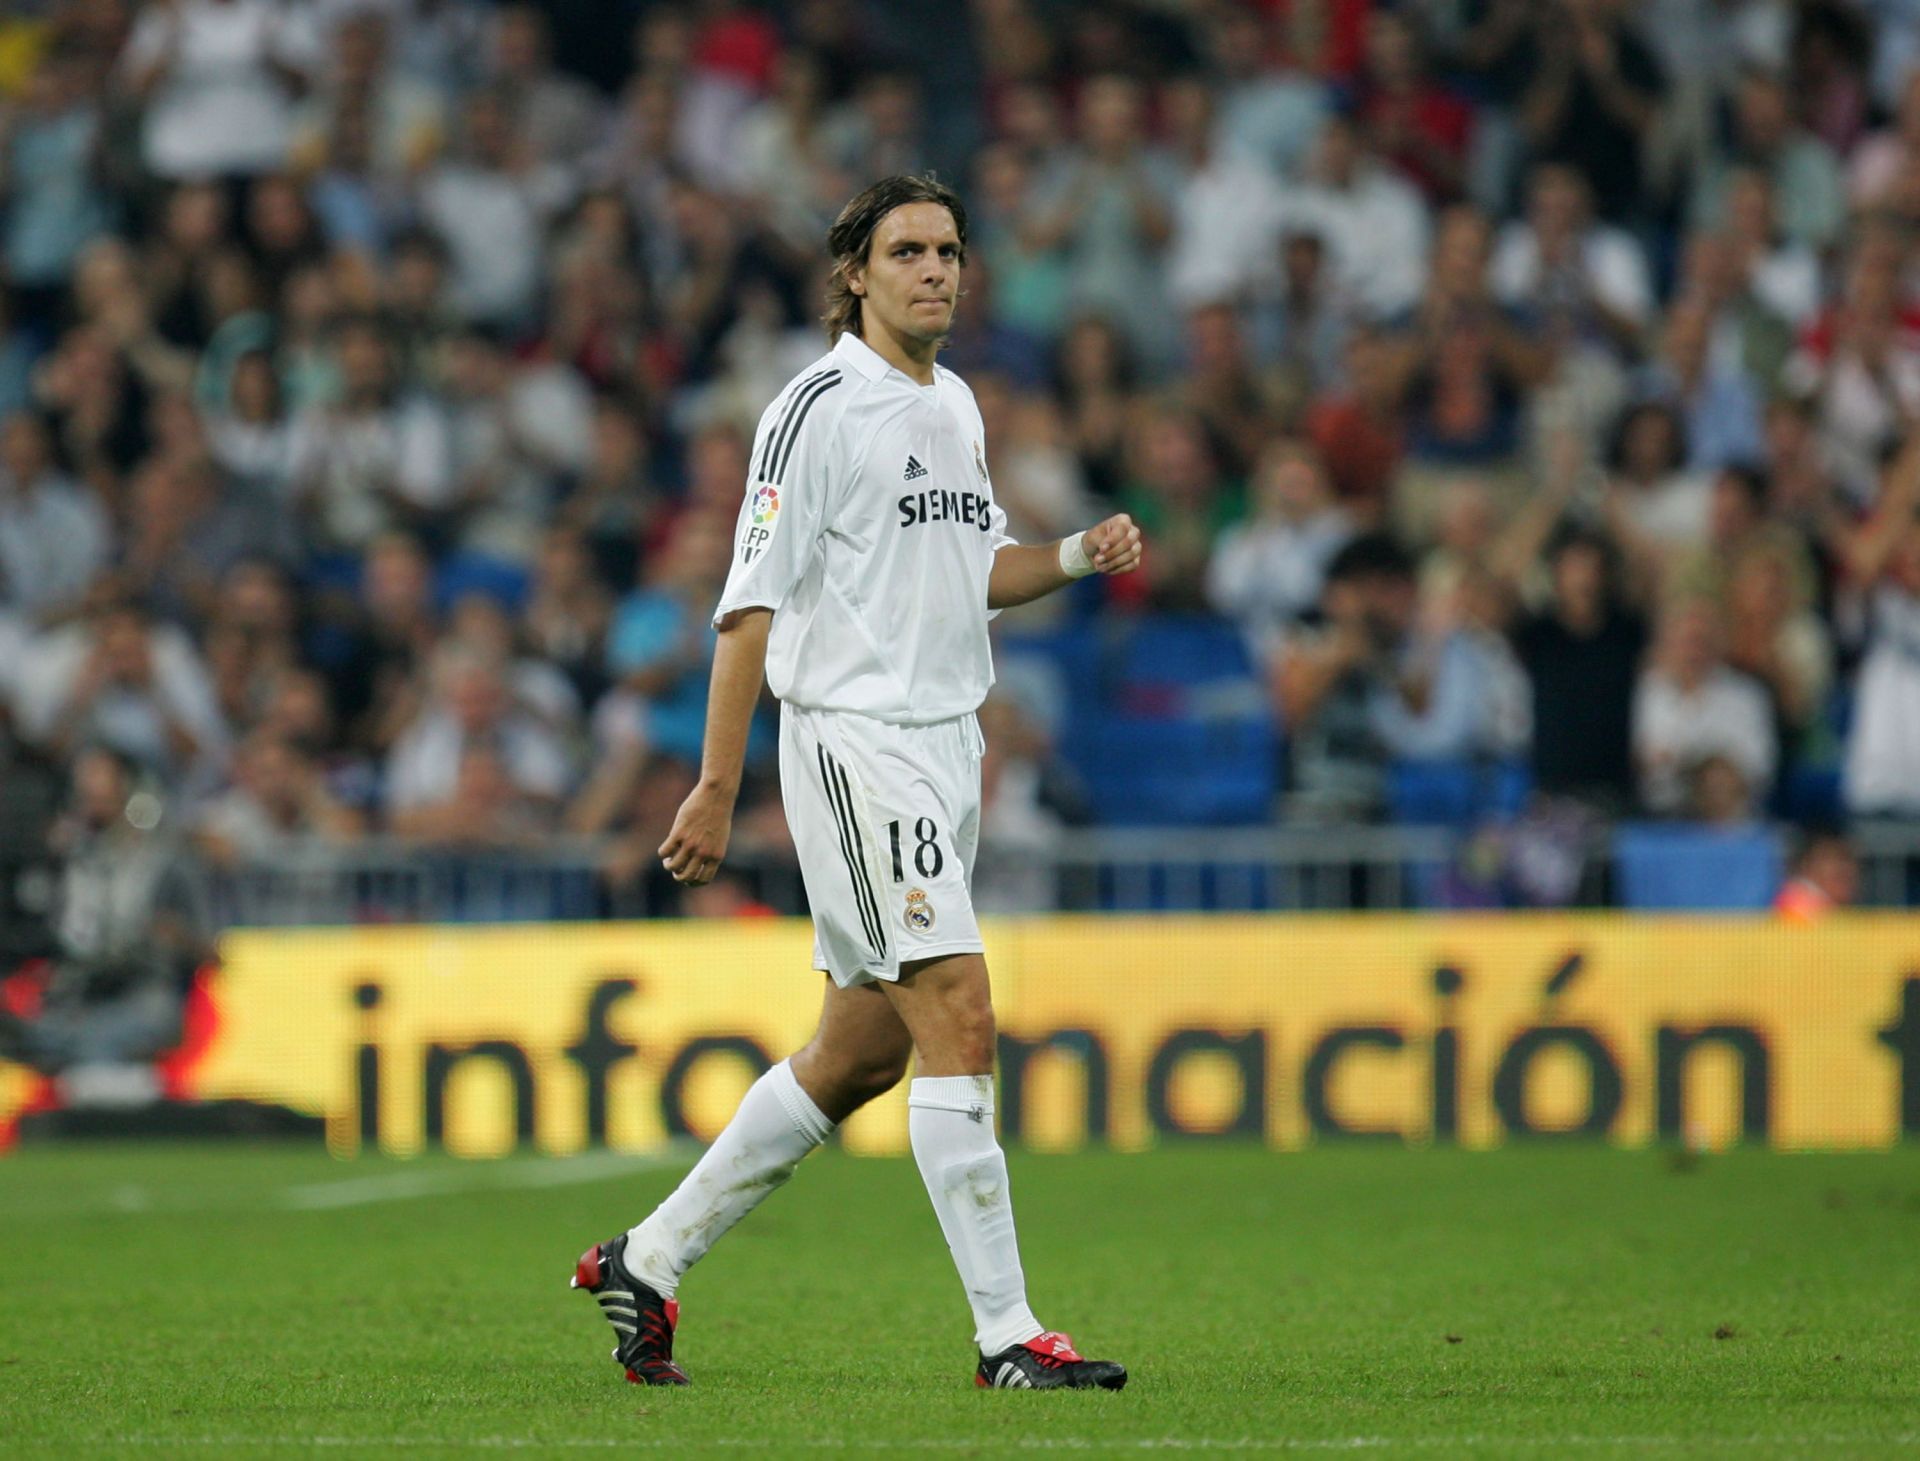 Jonathan Woodgate being sent off - Real Madrid v Athletic Bilbao